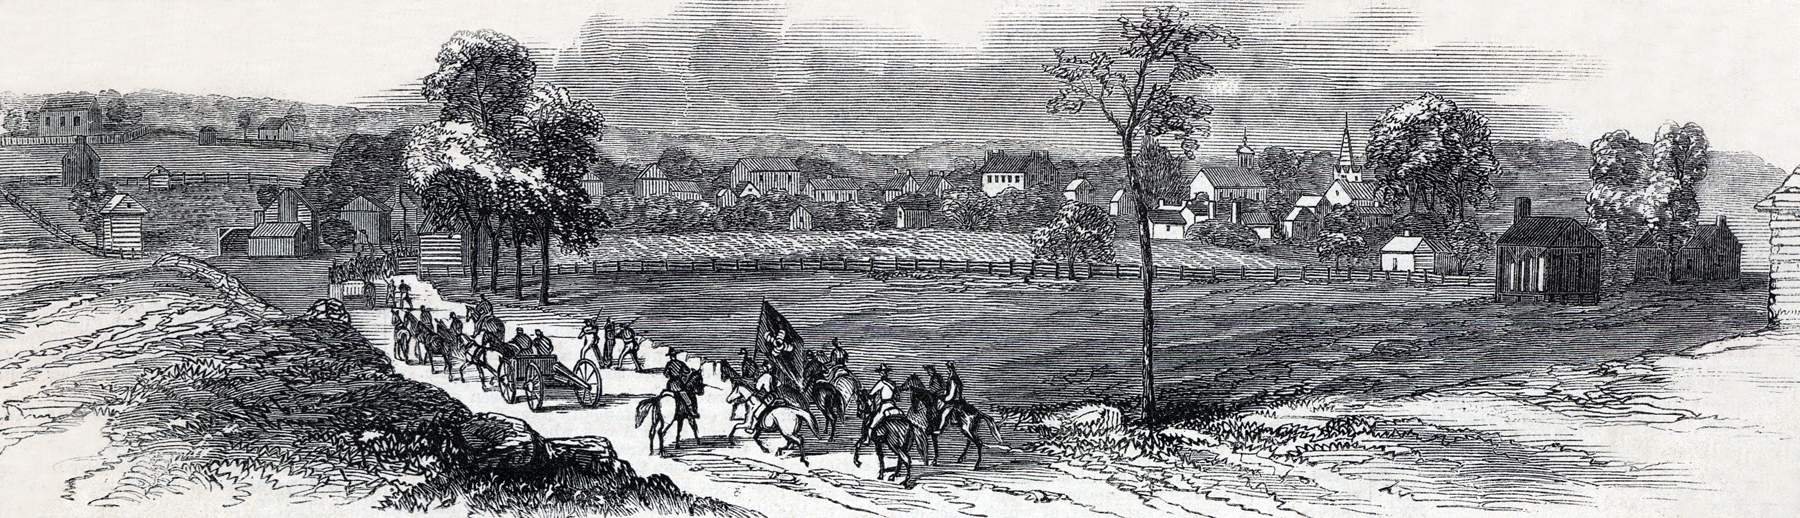 Smithfield, Virginia, September 1864, artist's impression, zoomable image